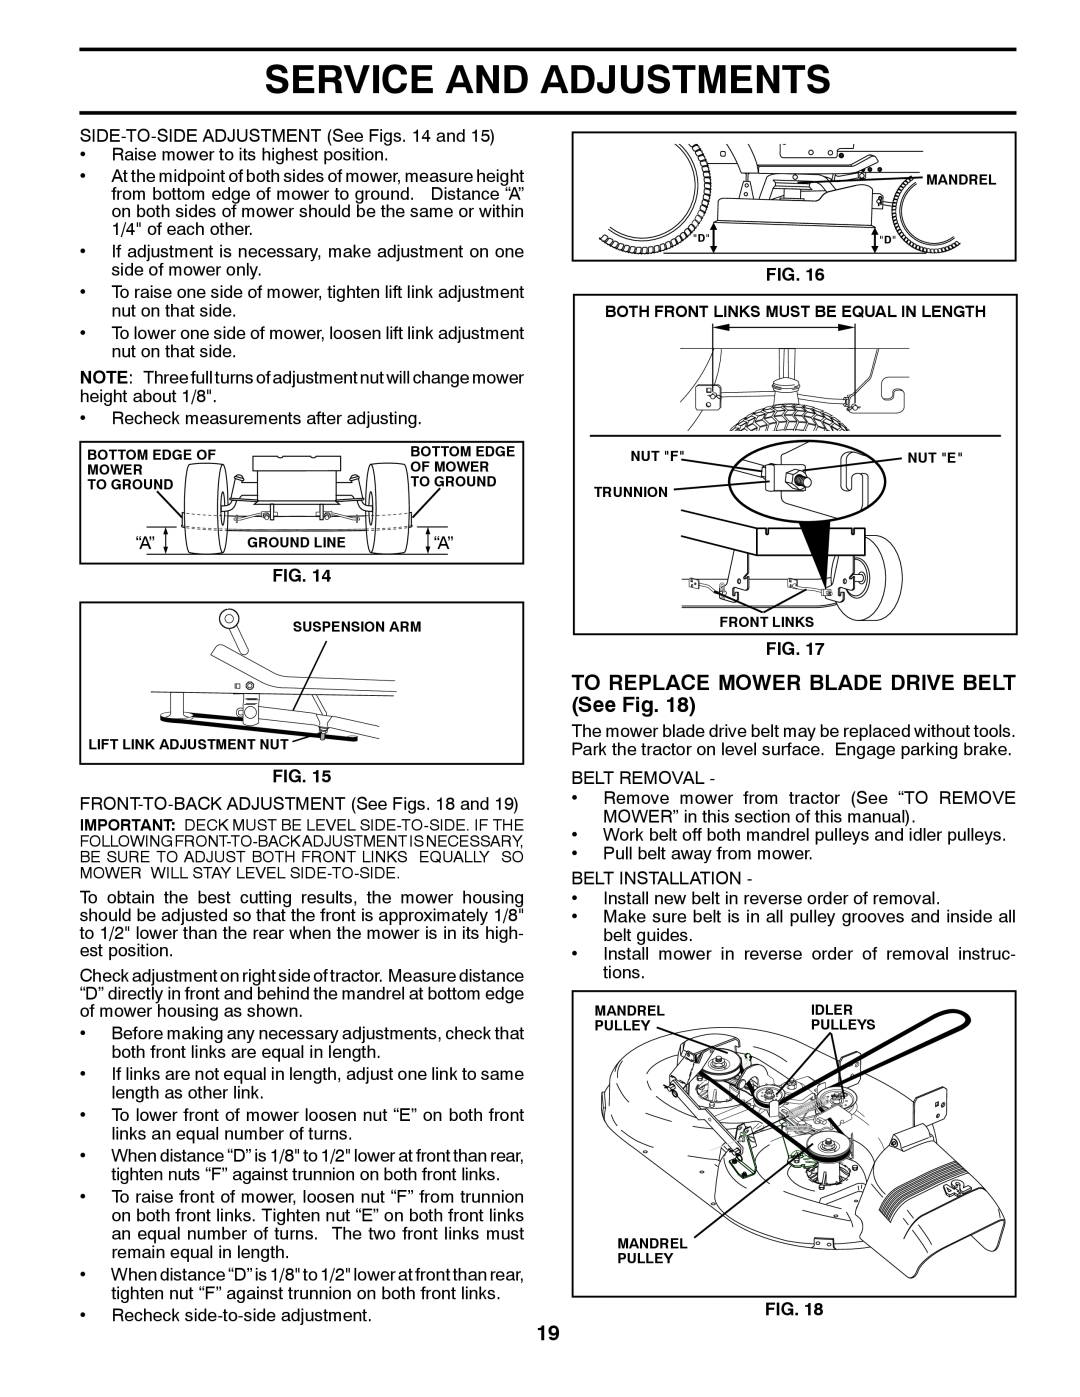 Poulan 96012008600 manual TO REPLACE MOWER BLADE DRIVE BELT See Fig, Service And Adjustments 